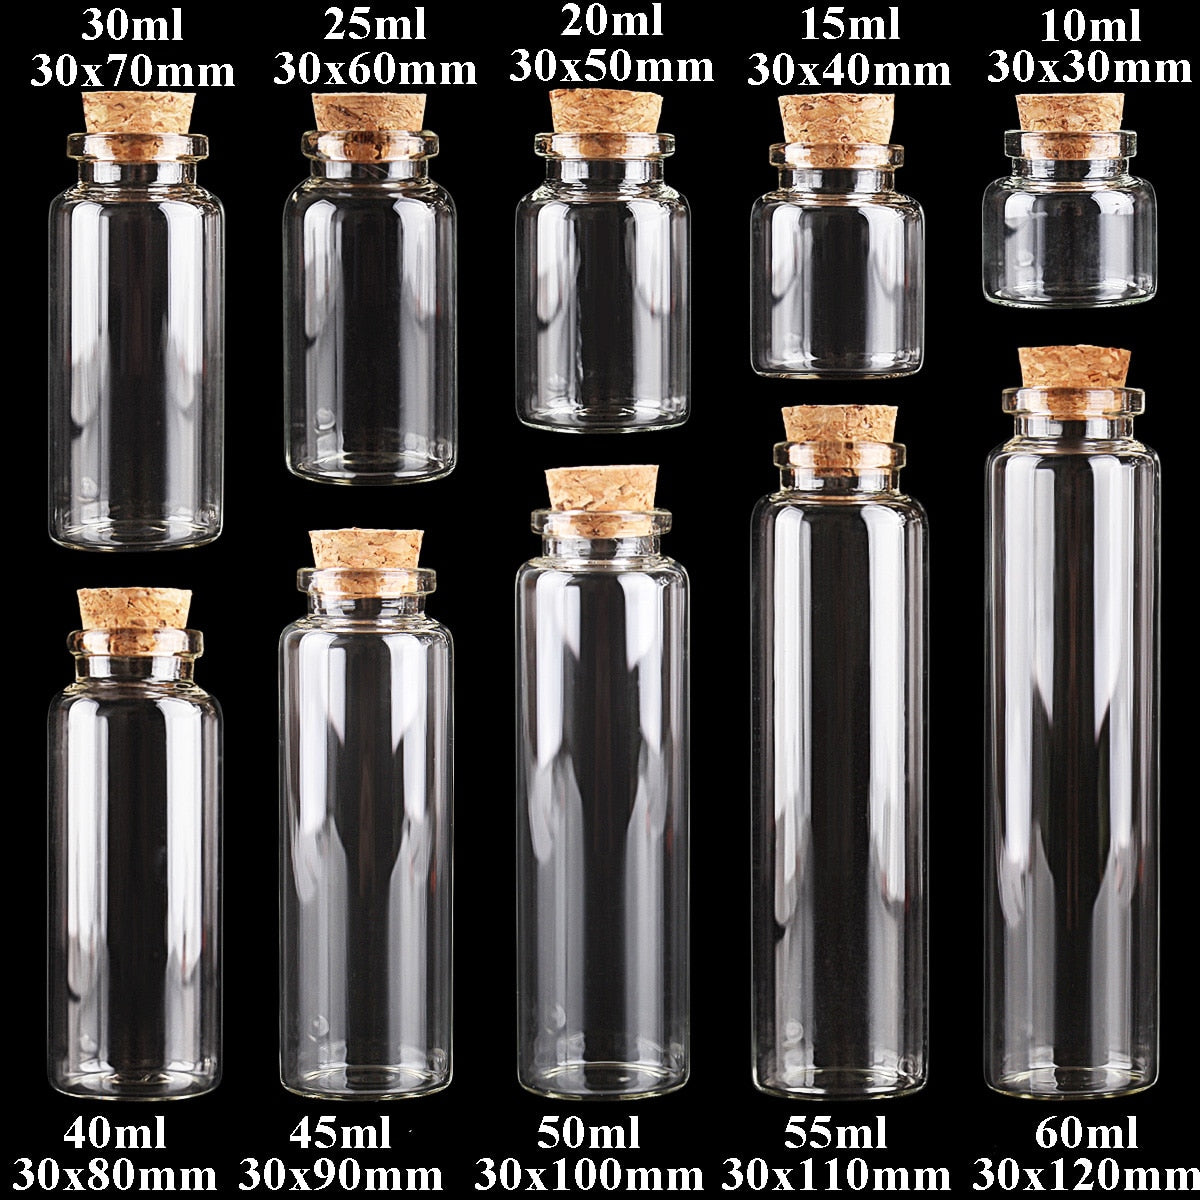 24 Clear Glass Bottles with Cork Stoppers - Various Sizes (10ml to 30ml) - Perfect for DIY Crafts, Spice Storage, and Vials